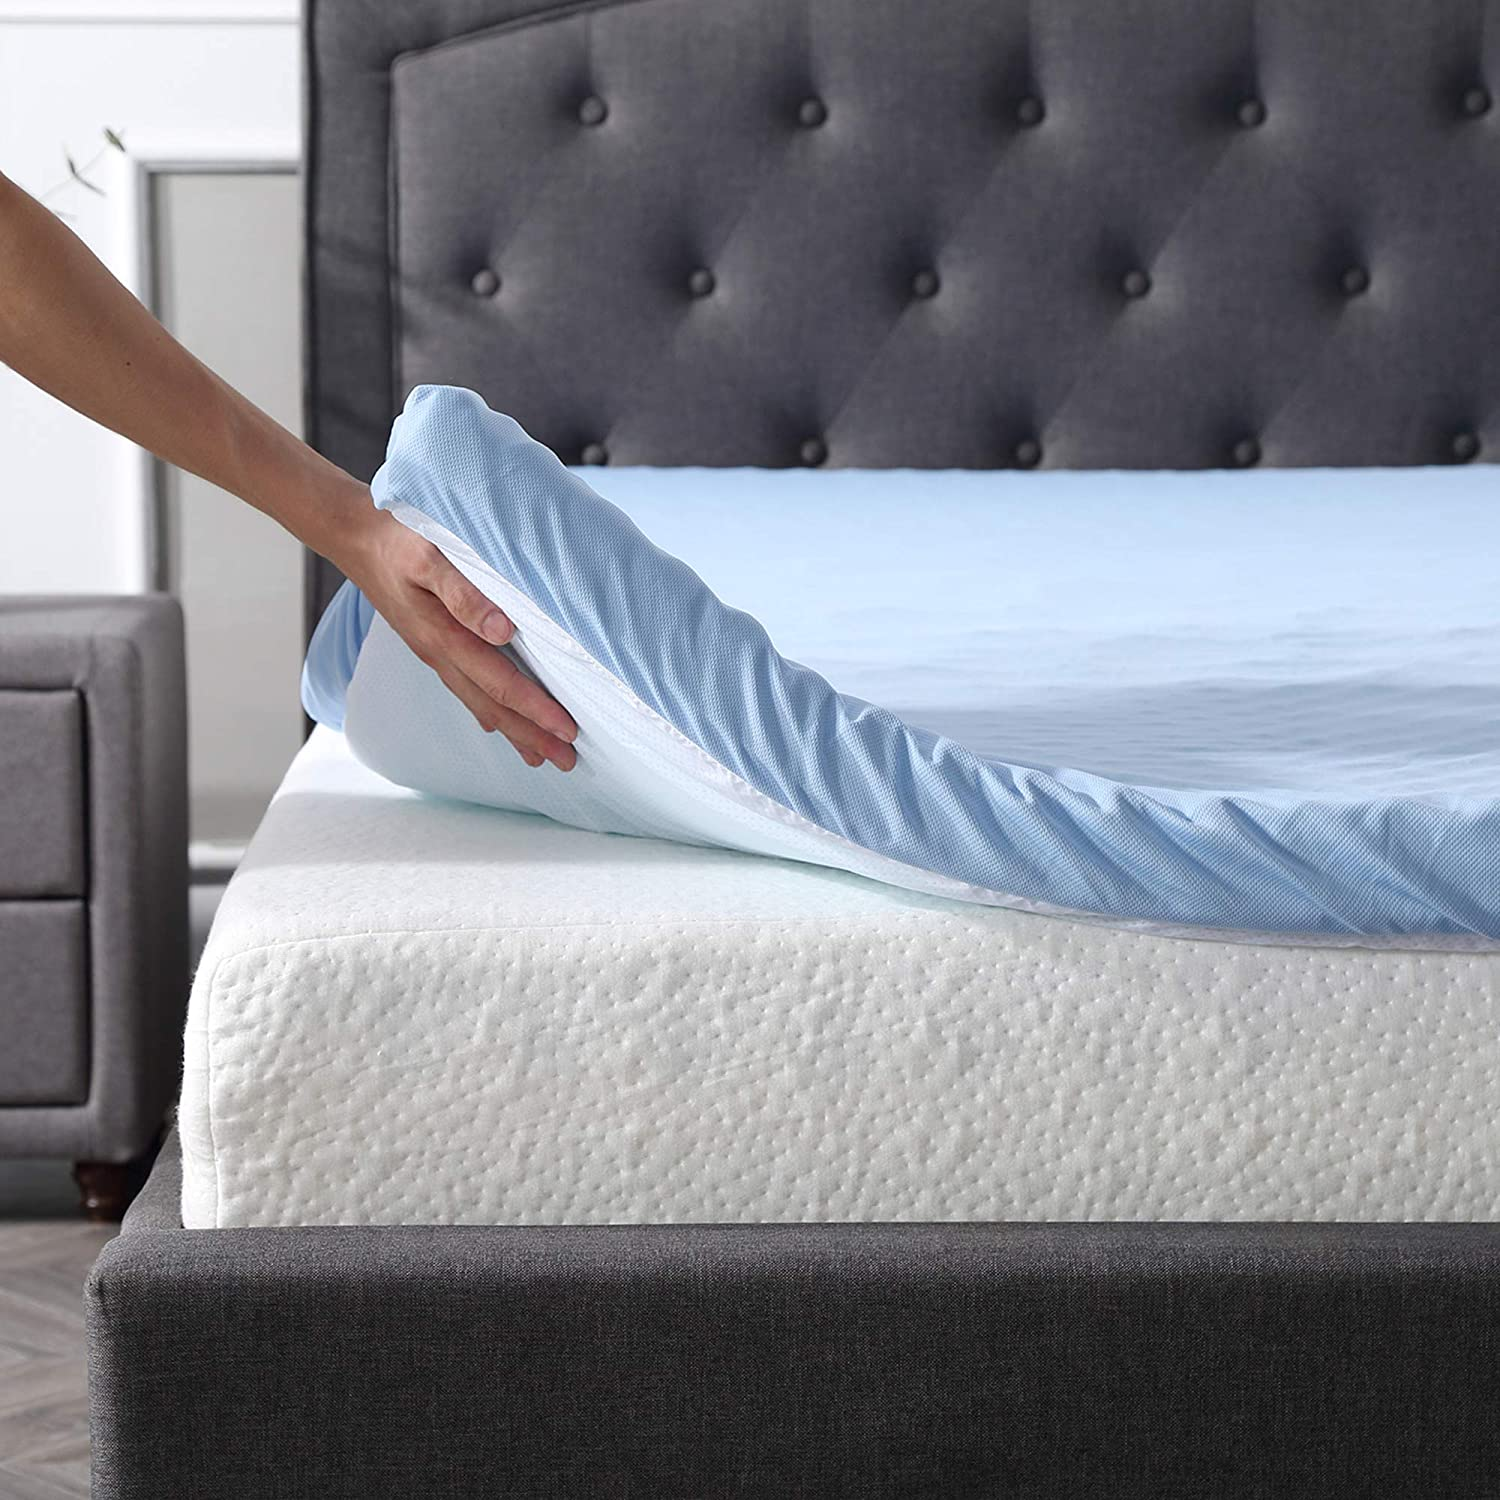 Use a gel foam mattress topper to cool a bed and soften it